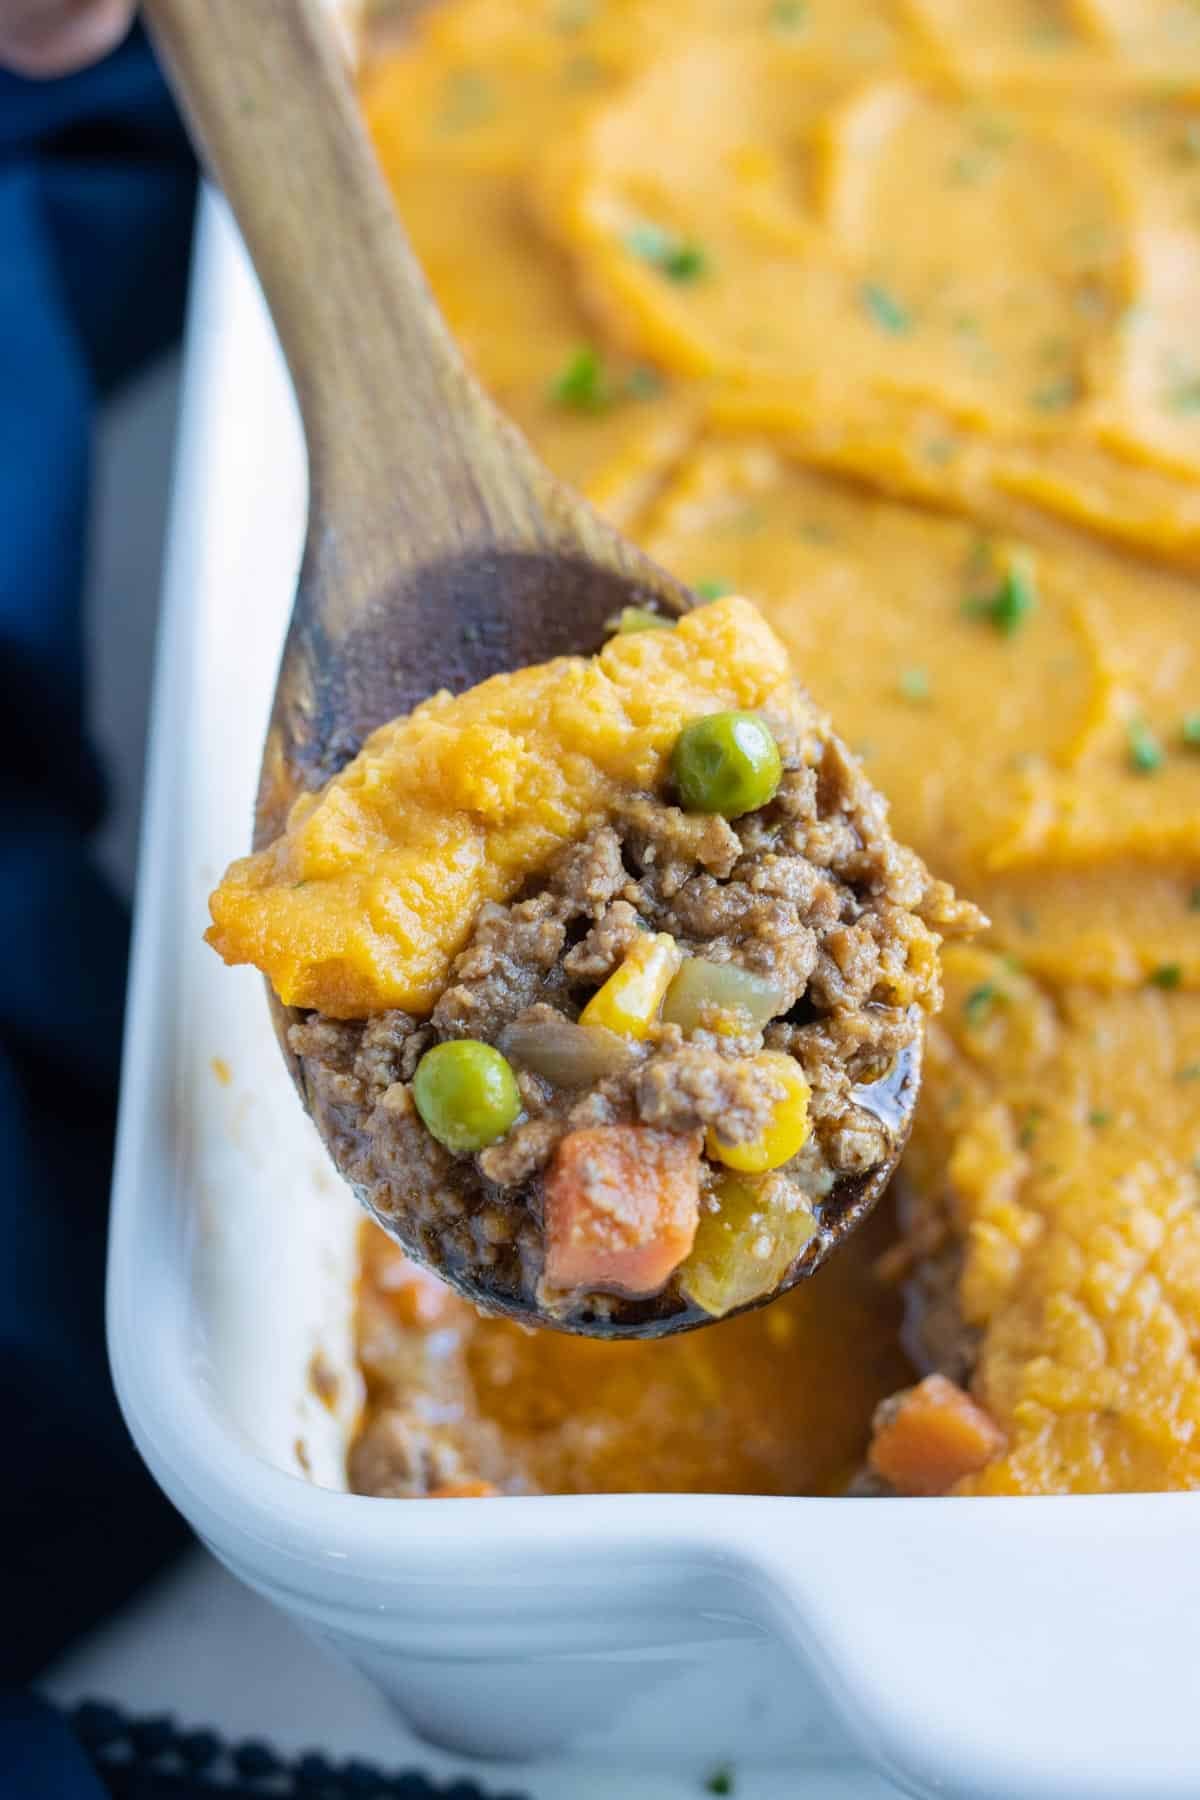 A scoop of sweet potatoes, ground beef, and veggies is served from the sweet potato casserole.